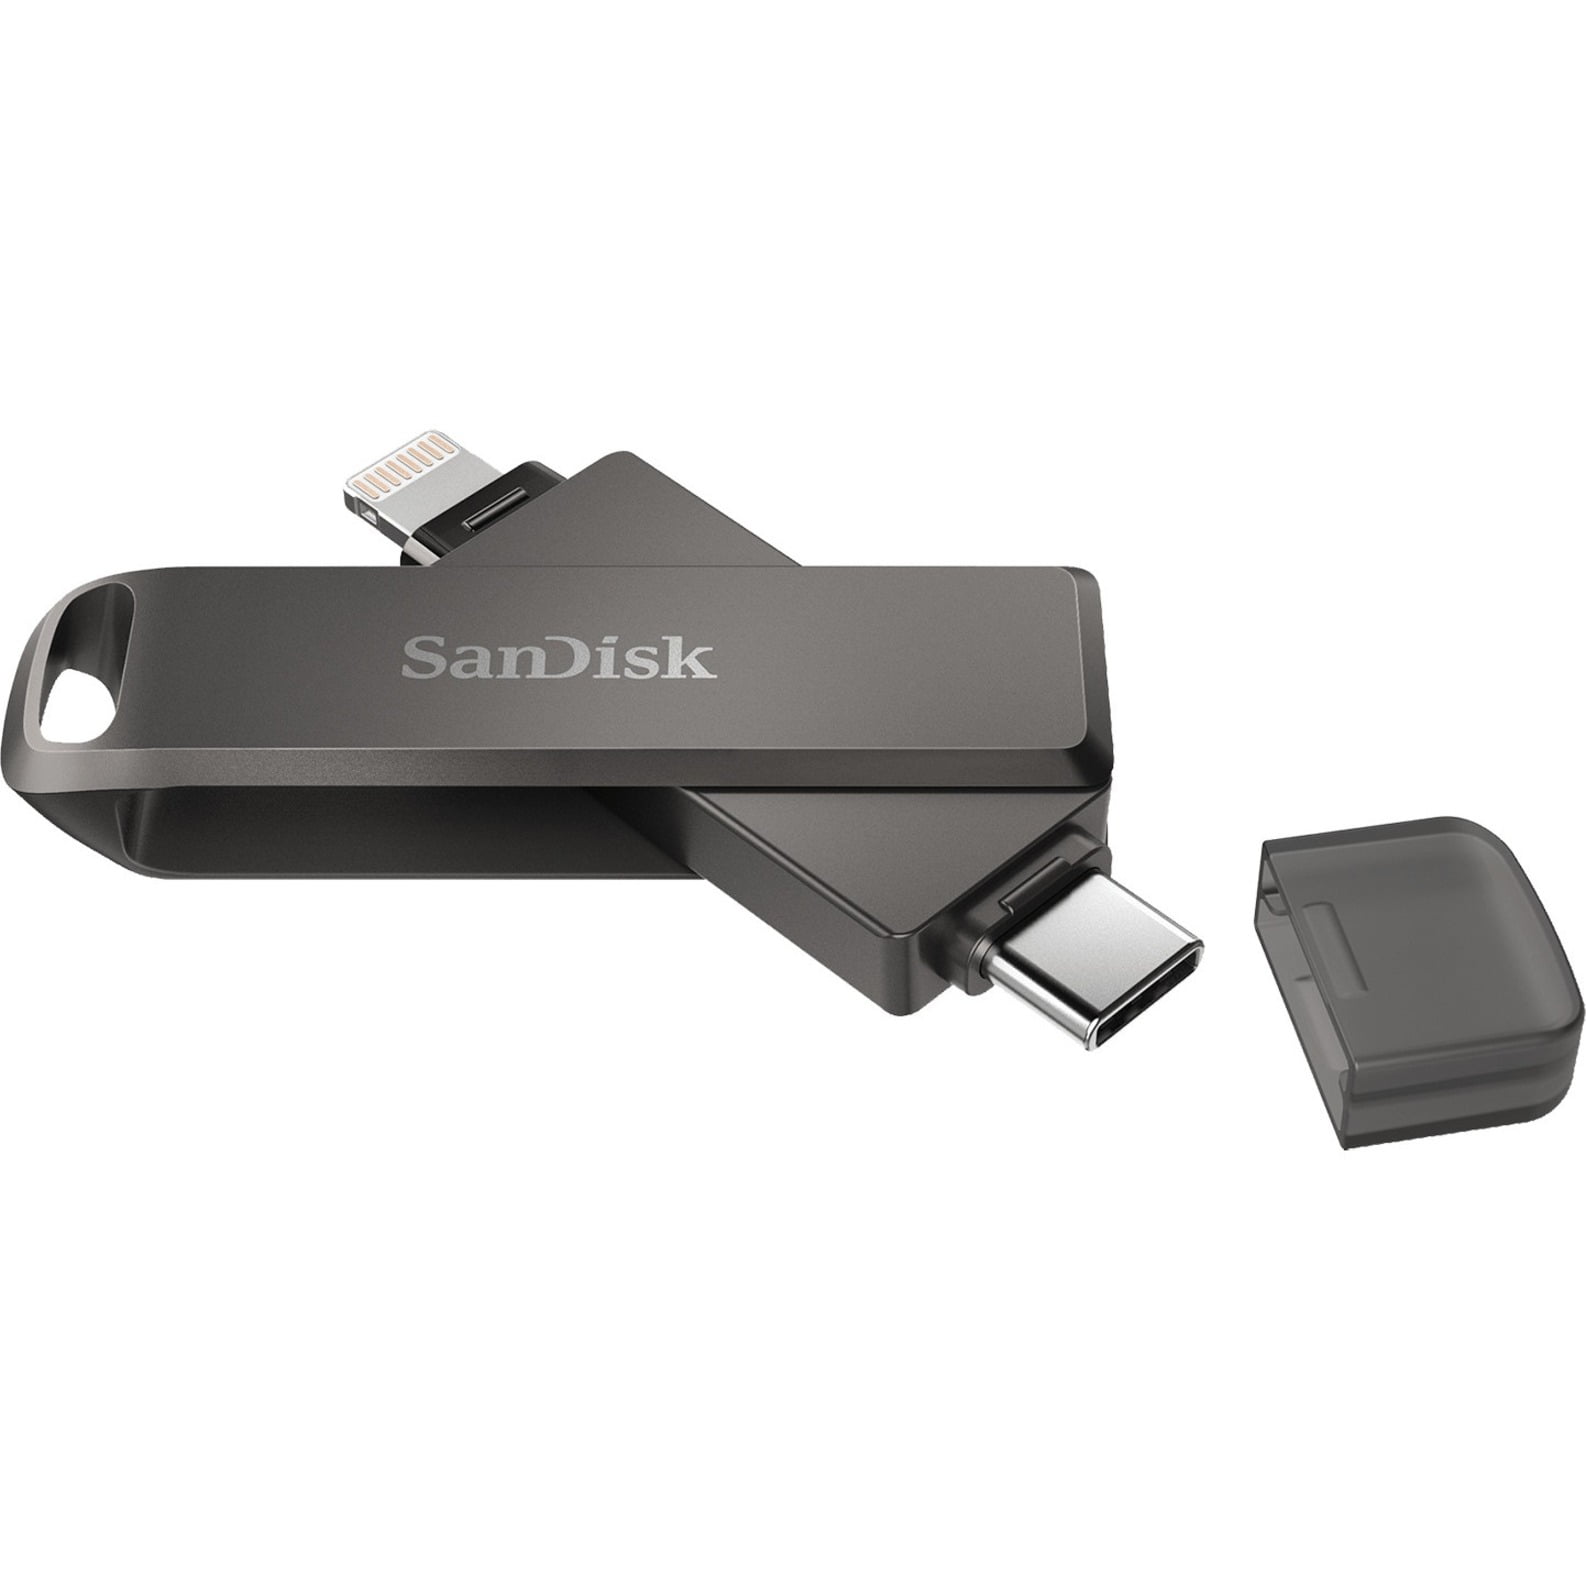 16 GB Black SanDisk iXpand V2 USB Flash Drive for iPhone and iPad